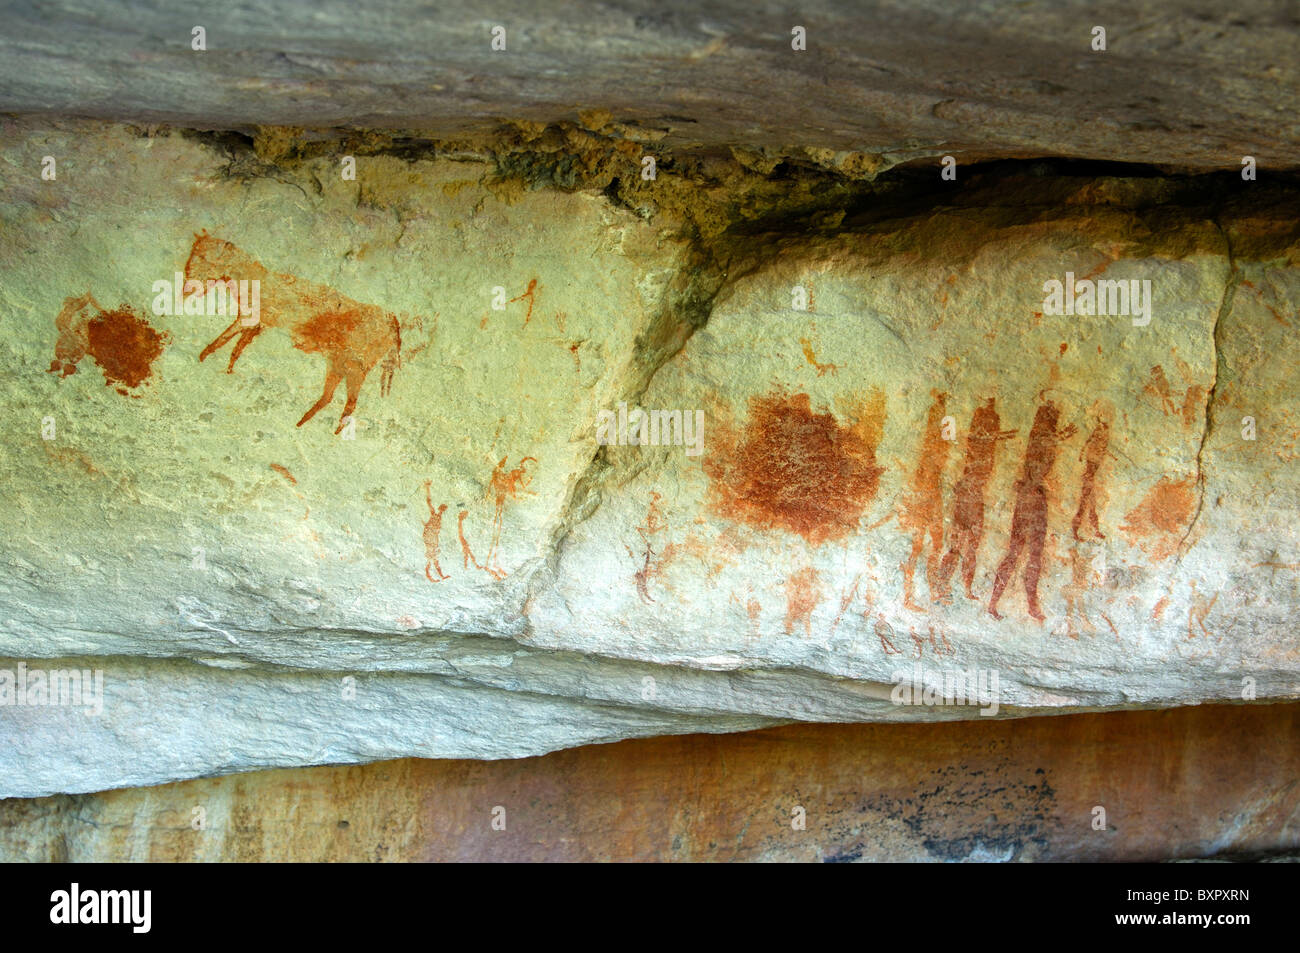 Prehistoric rock paintings of animals and a groupe of persons by the San people, Cederberg Mountains, South Africa Stock Photo